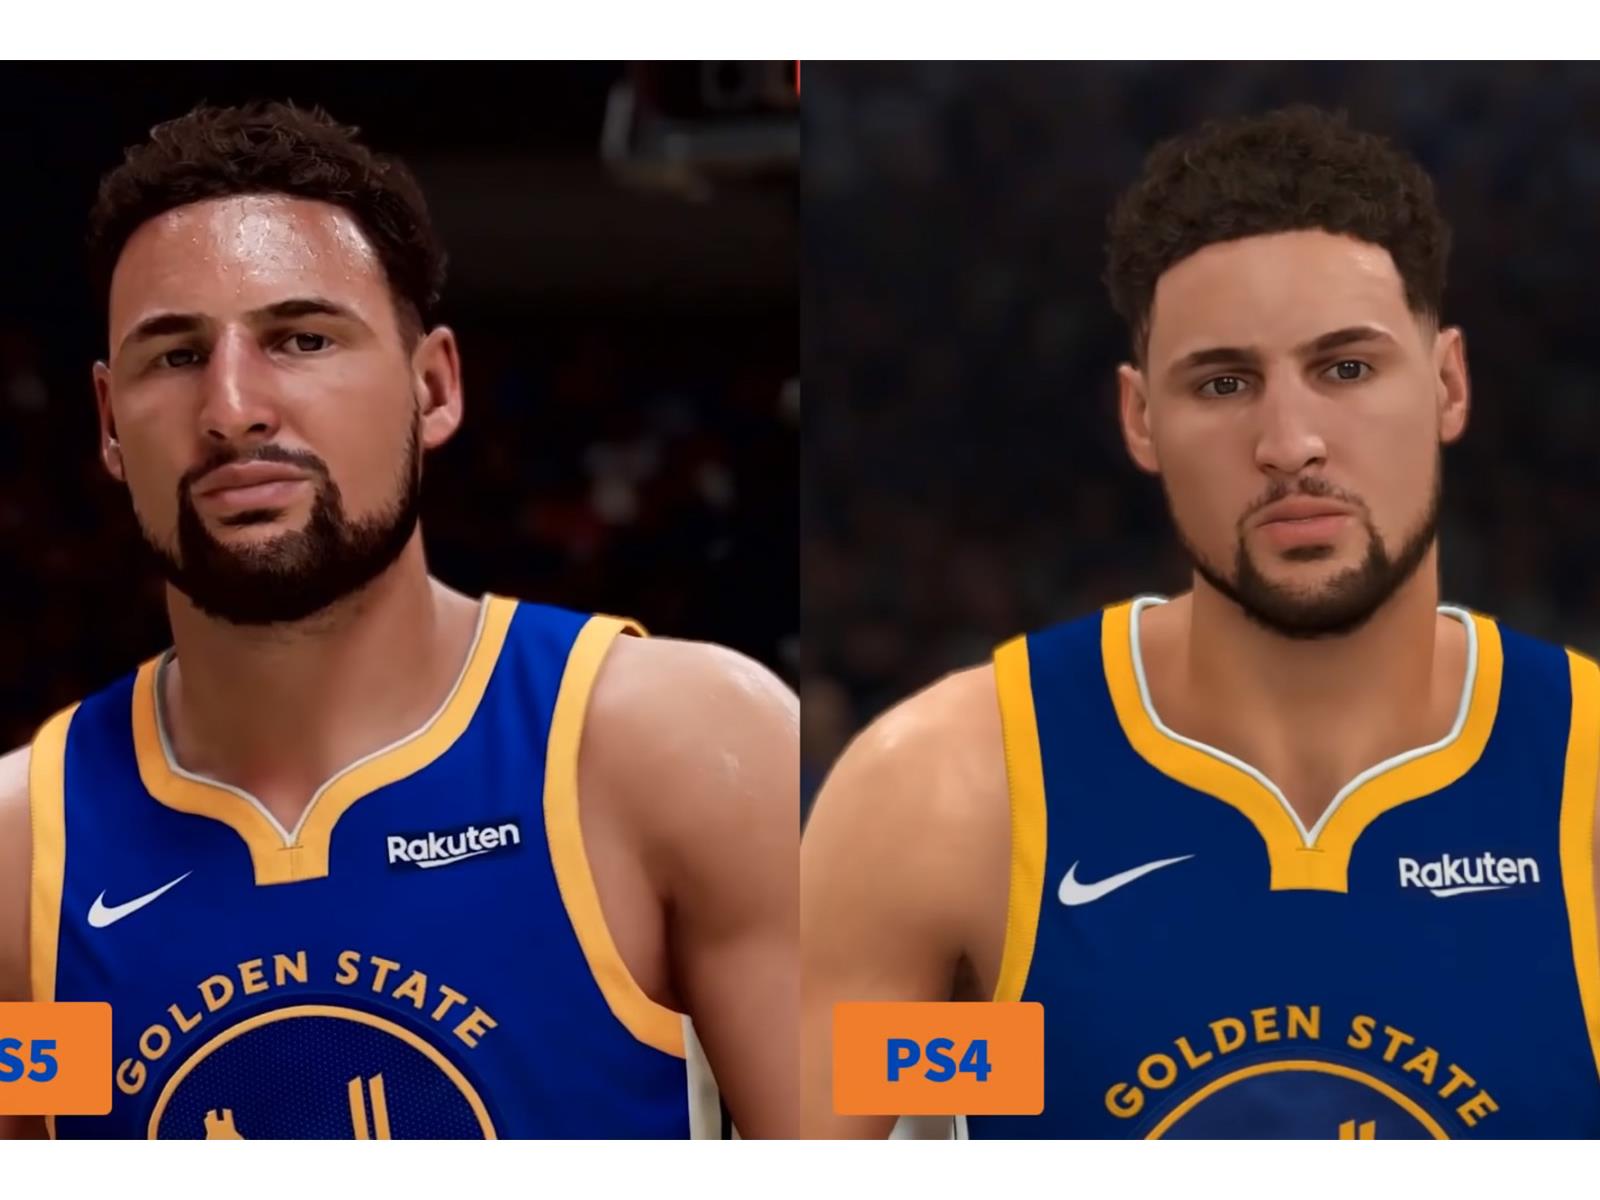 Nba 2k21 Ps5 Graphics Quality Dunks All Over Ps4 In Side By Side Comparison Video Hothardware